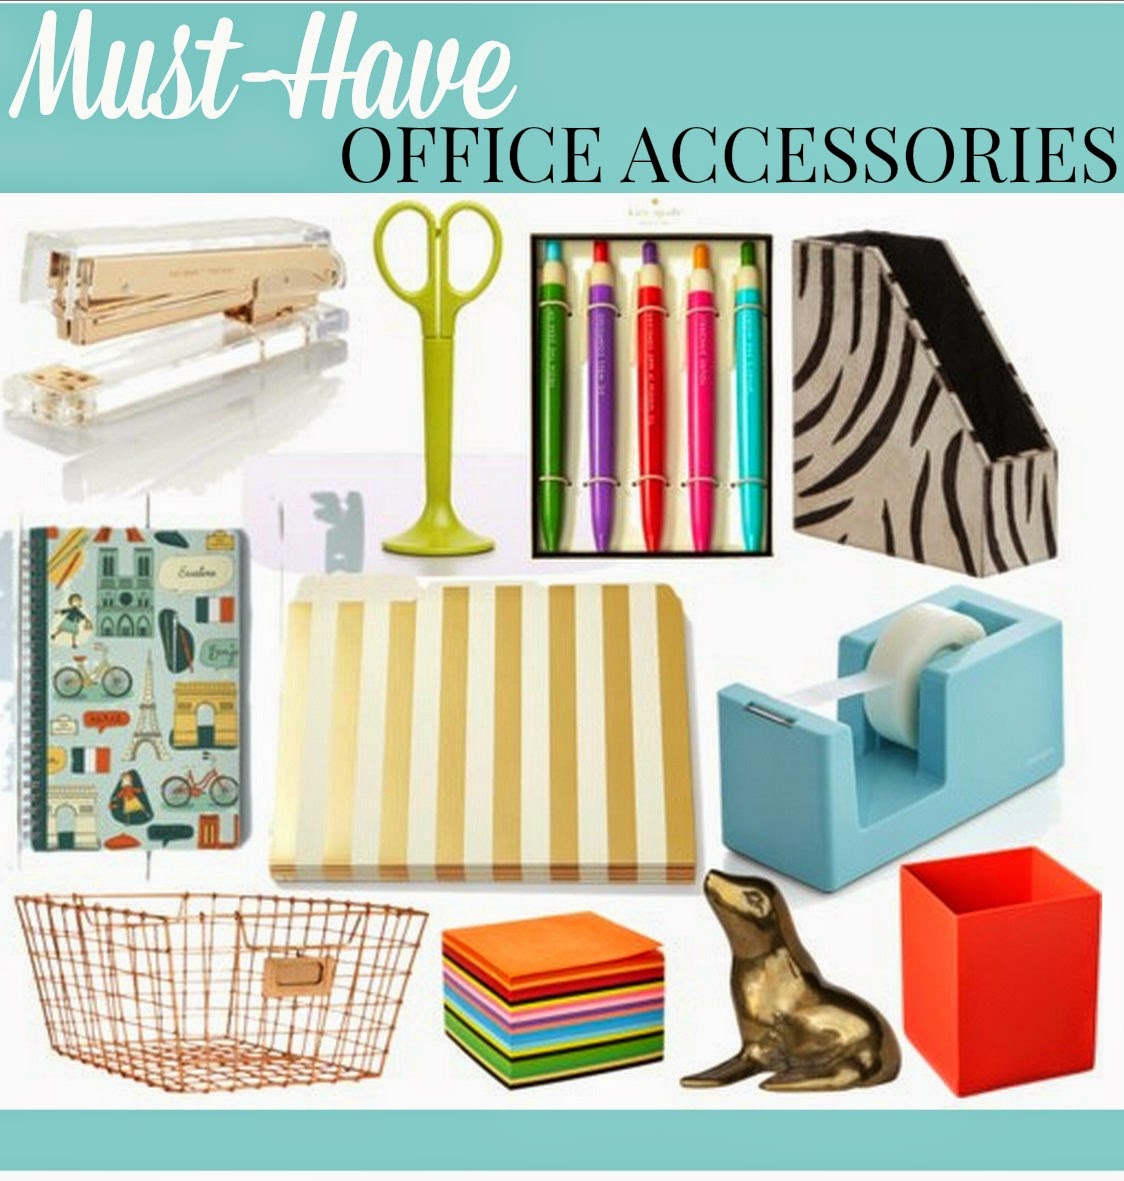 The Ultimate List Of Must Have Accessories For Every Room